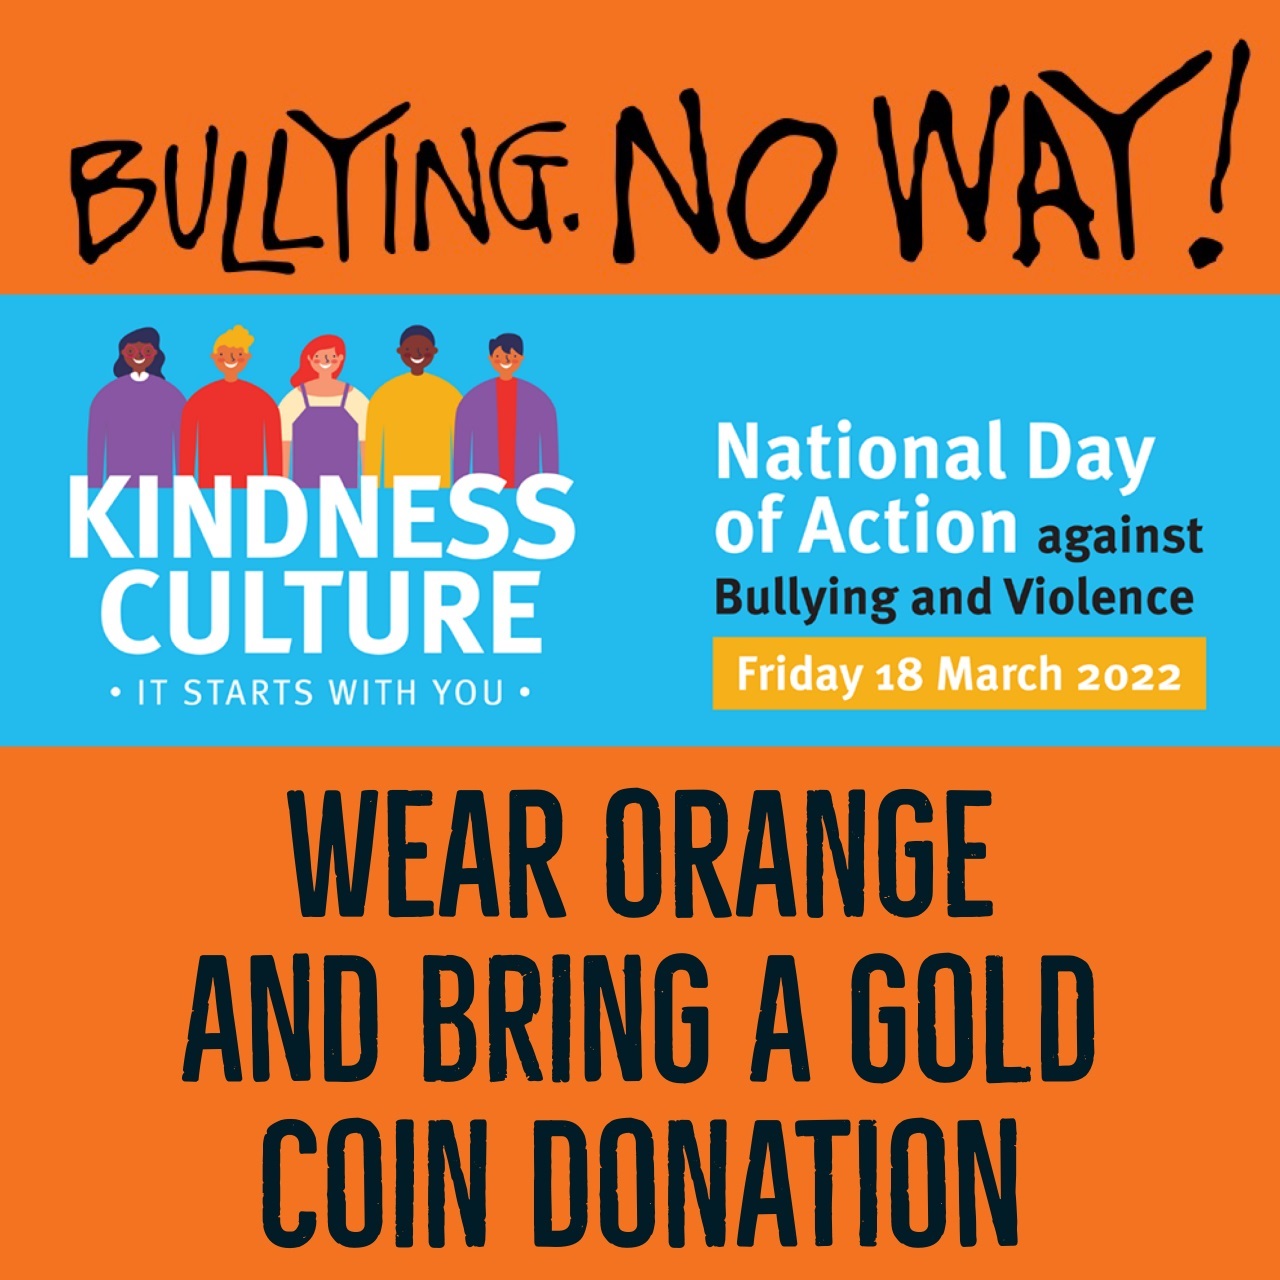 National Day of Action against Bullying and Violence